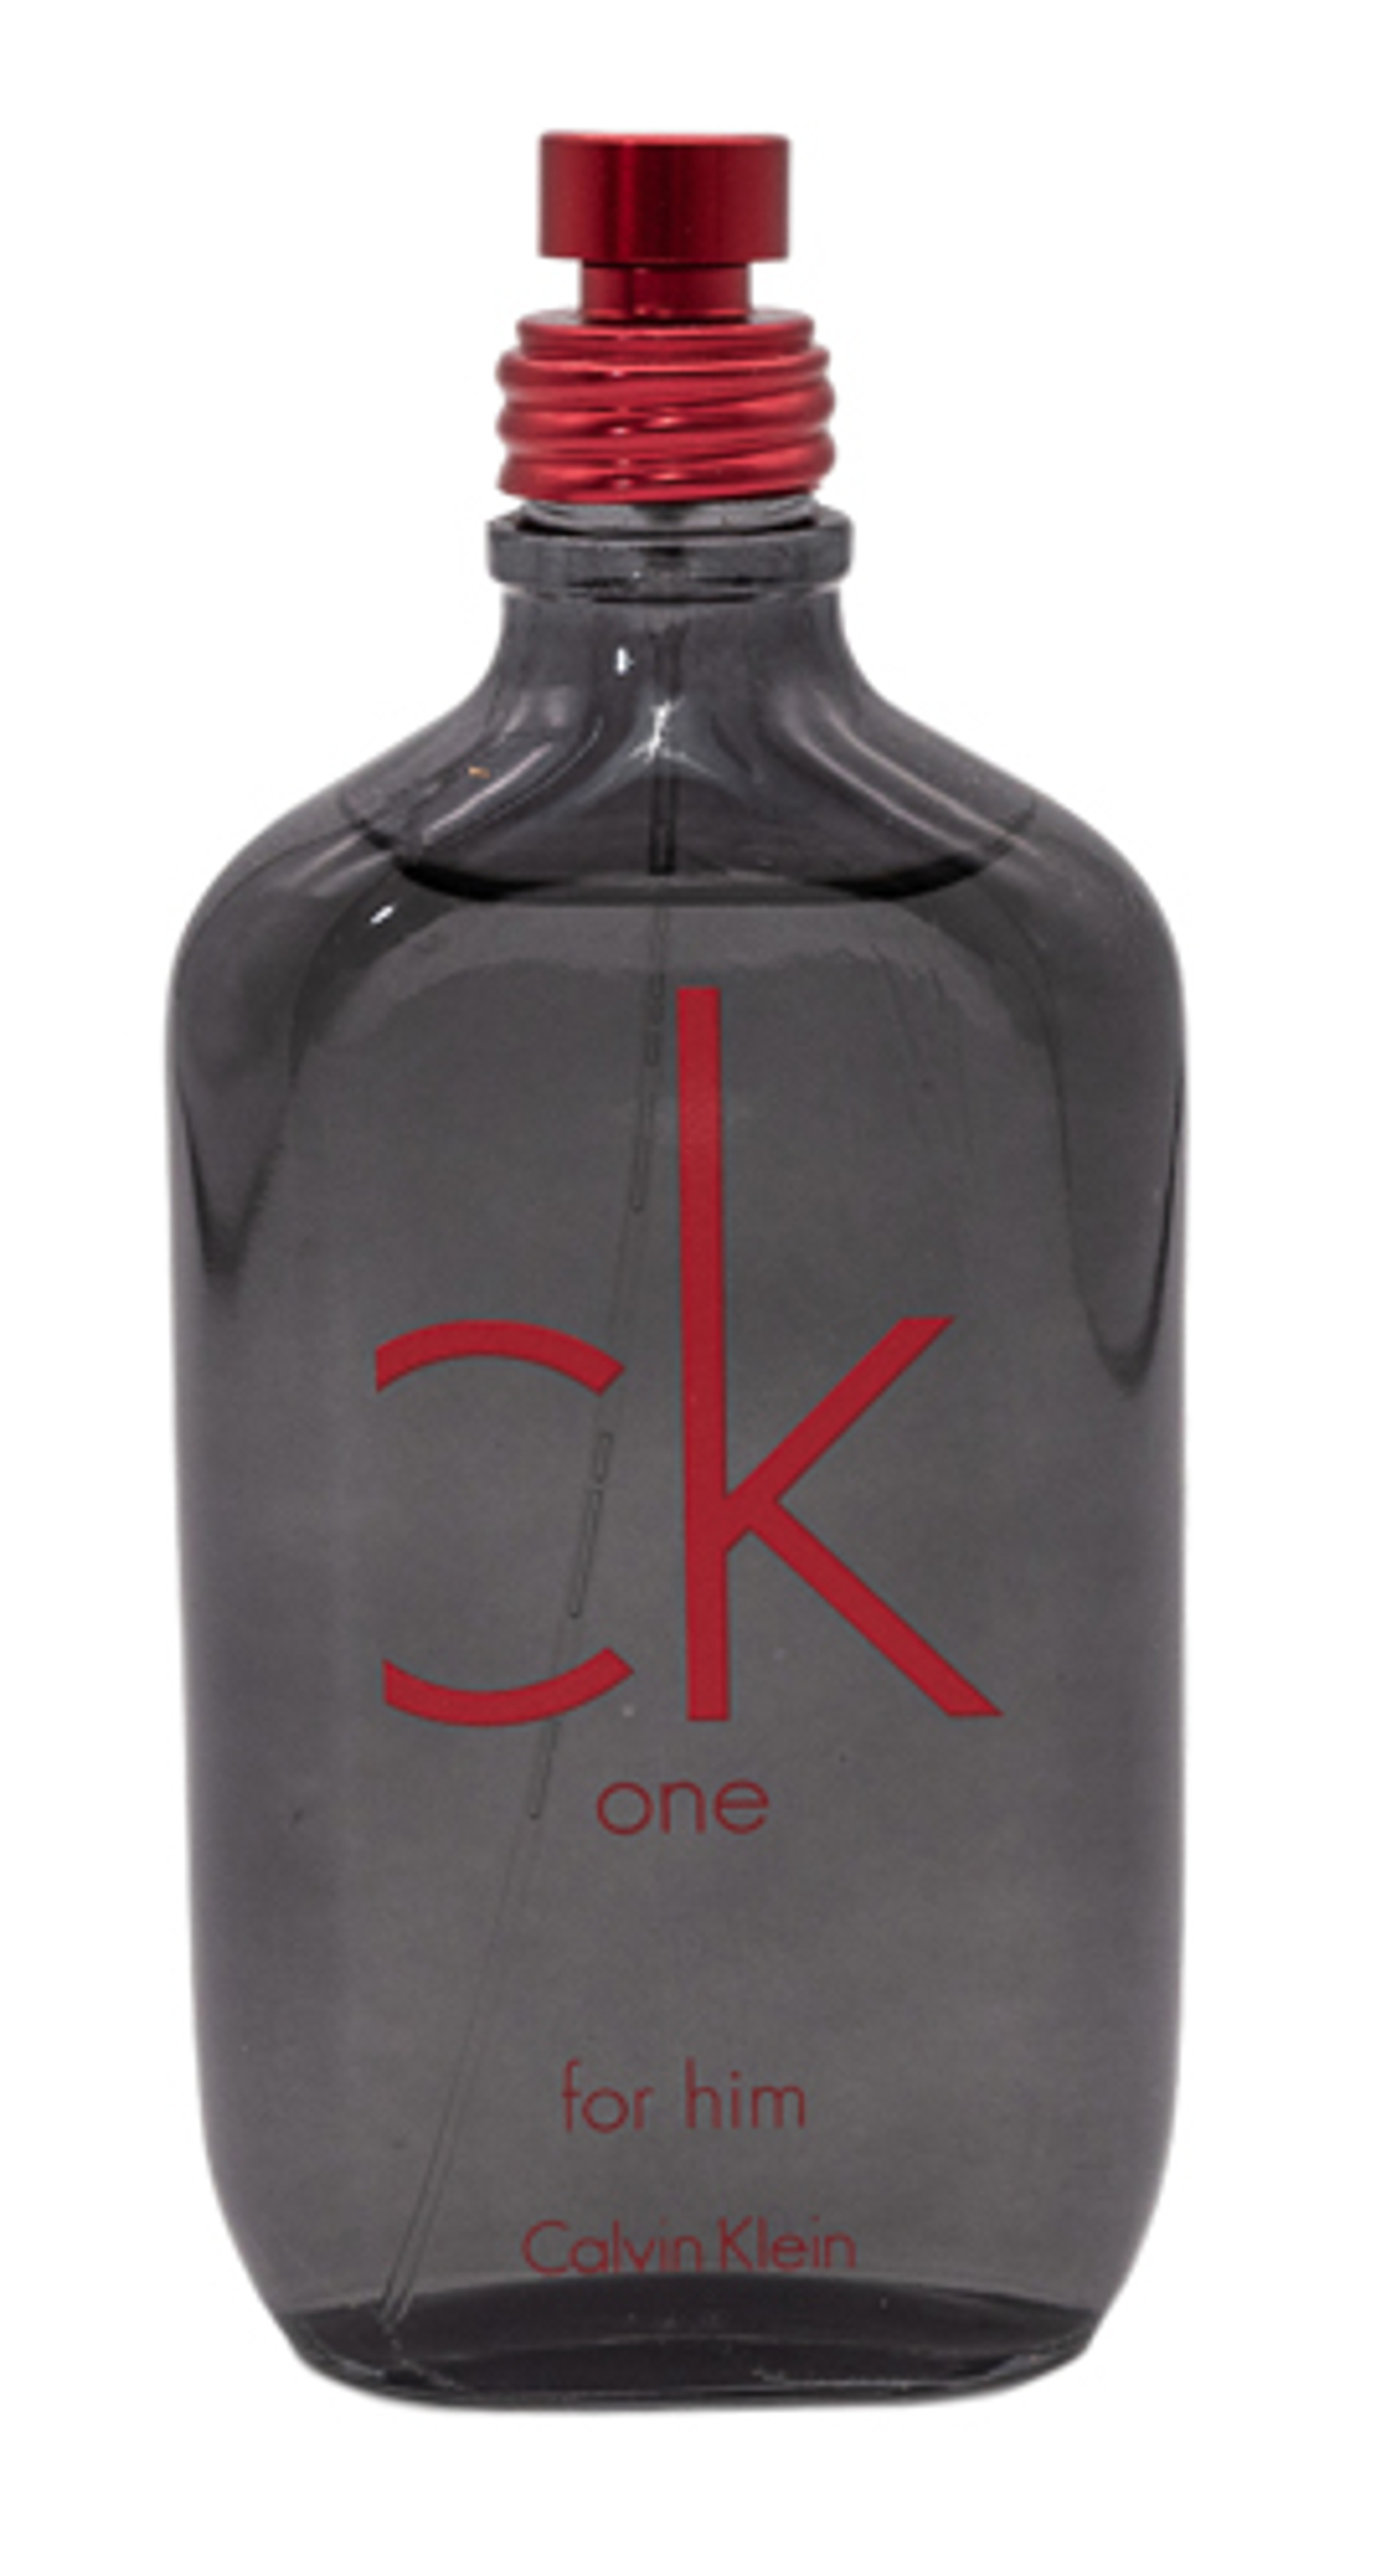 Ck One Red Edition by Calvin Klein 3.4 oz EDT Cologne for Men Tester ...